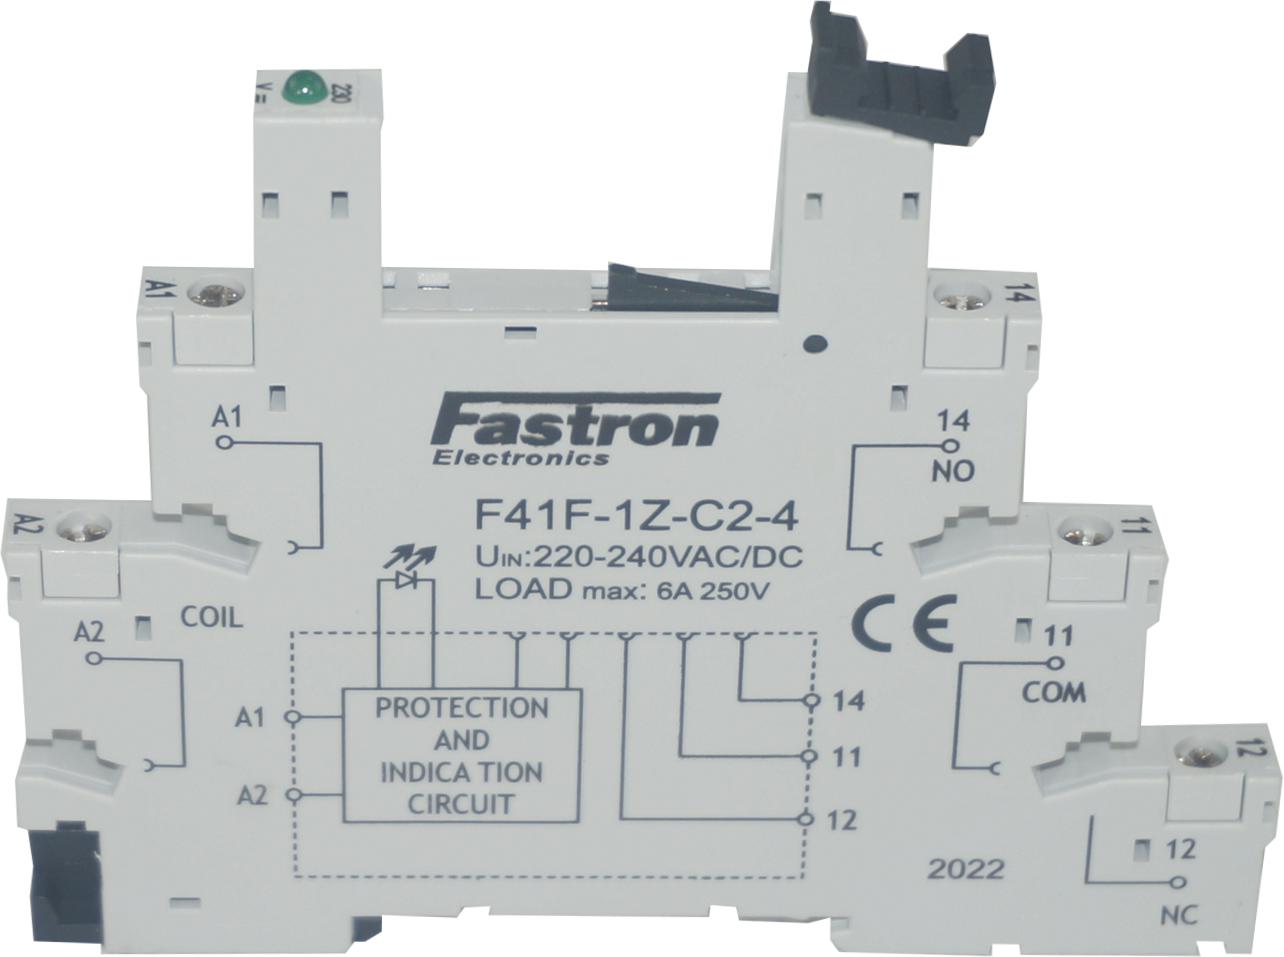 F41F-1Z-C2-1 12-24VAC/DC SOCKET ONLY, Slimline Socket with Screw Terminals, for F41F 1-36VAC/DC Control Series Slim Relays-Relay Slimline-Fastron Electronics-Fastron Electronics Store